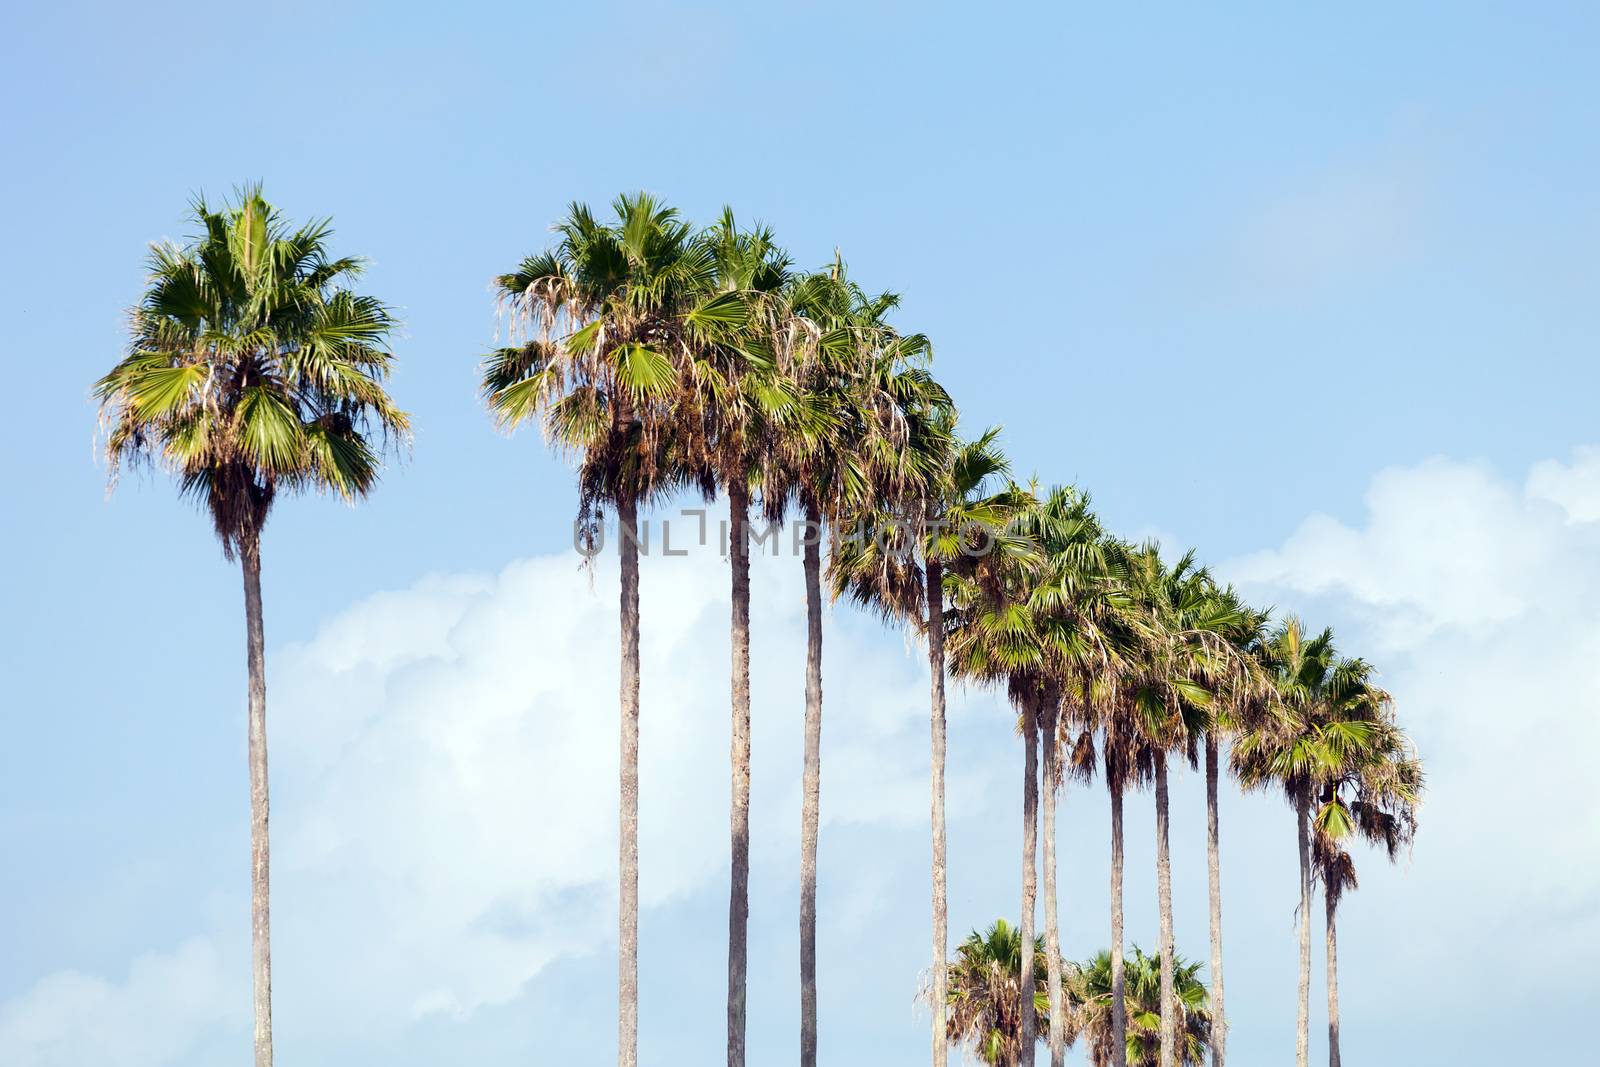 A row of palm trees in a tropical Florida setting.